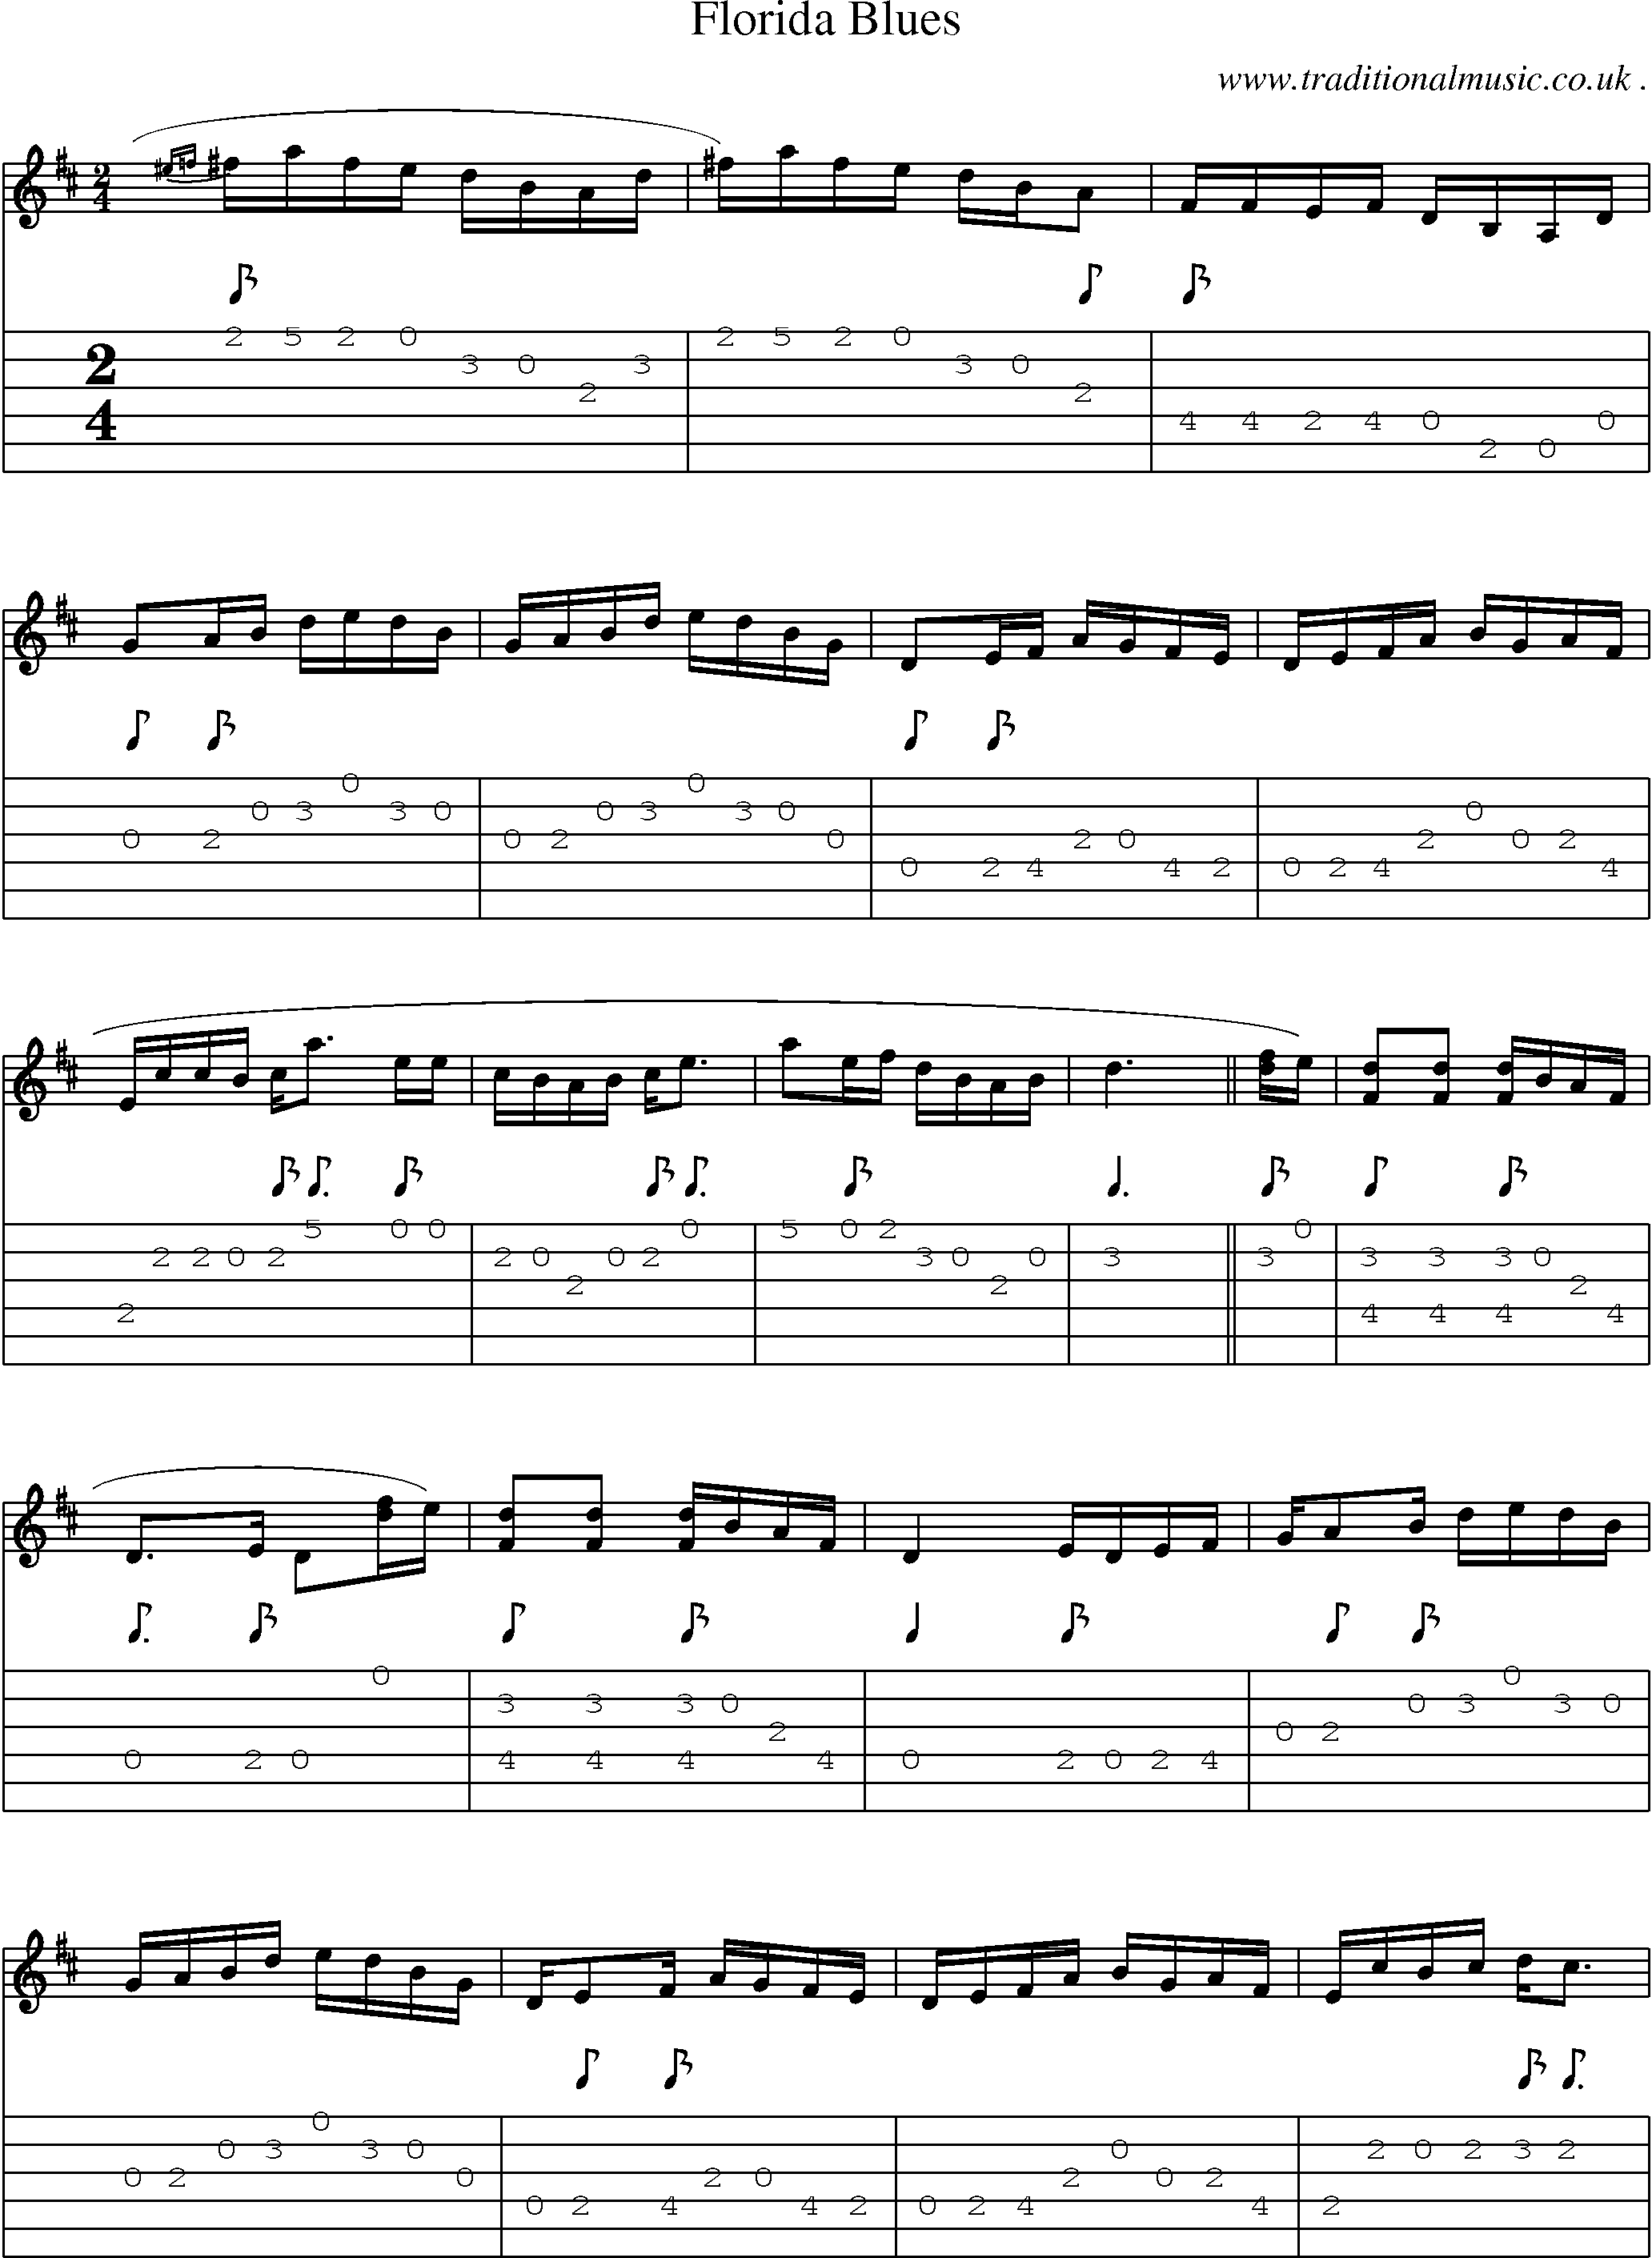 Music Score and Guitar Tabs for Florida Blues